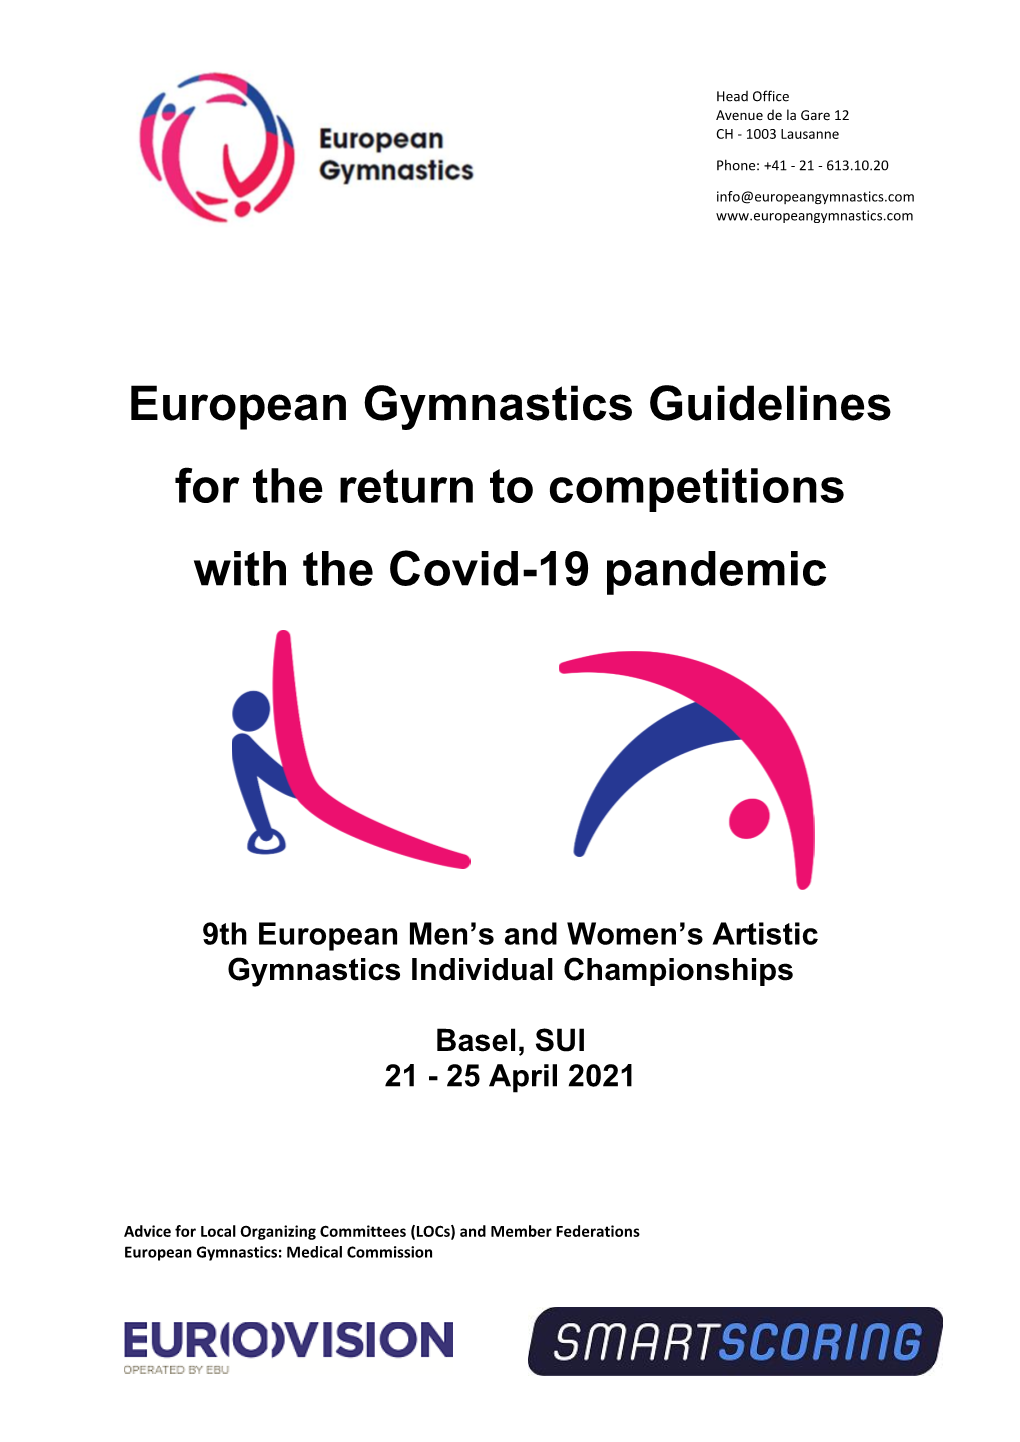 European Gymnastics Guidelines for the Return to Competitions with the Covid-19 Pandemic